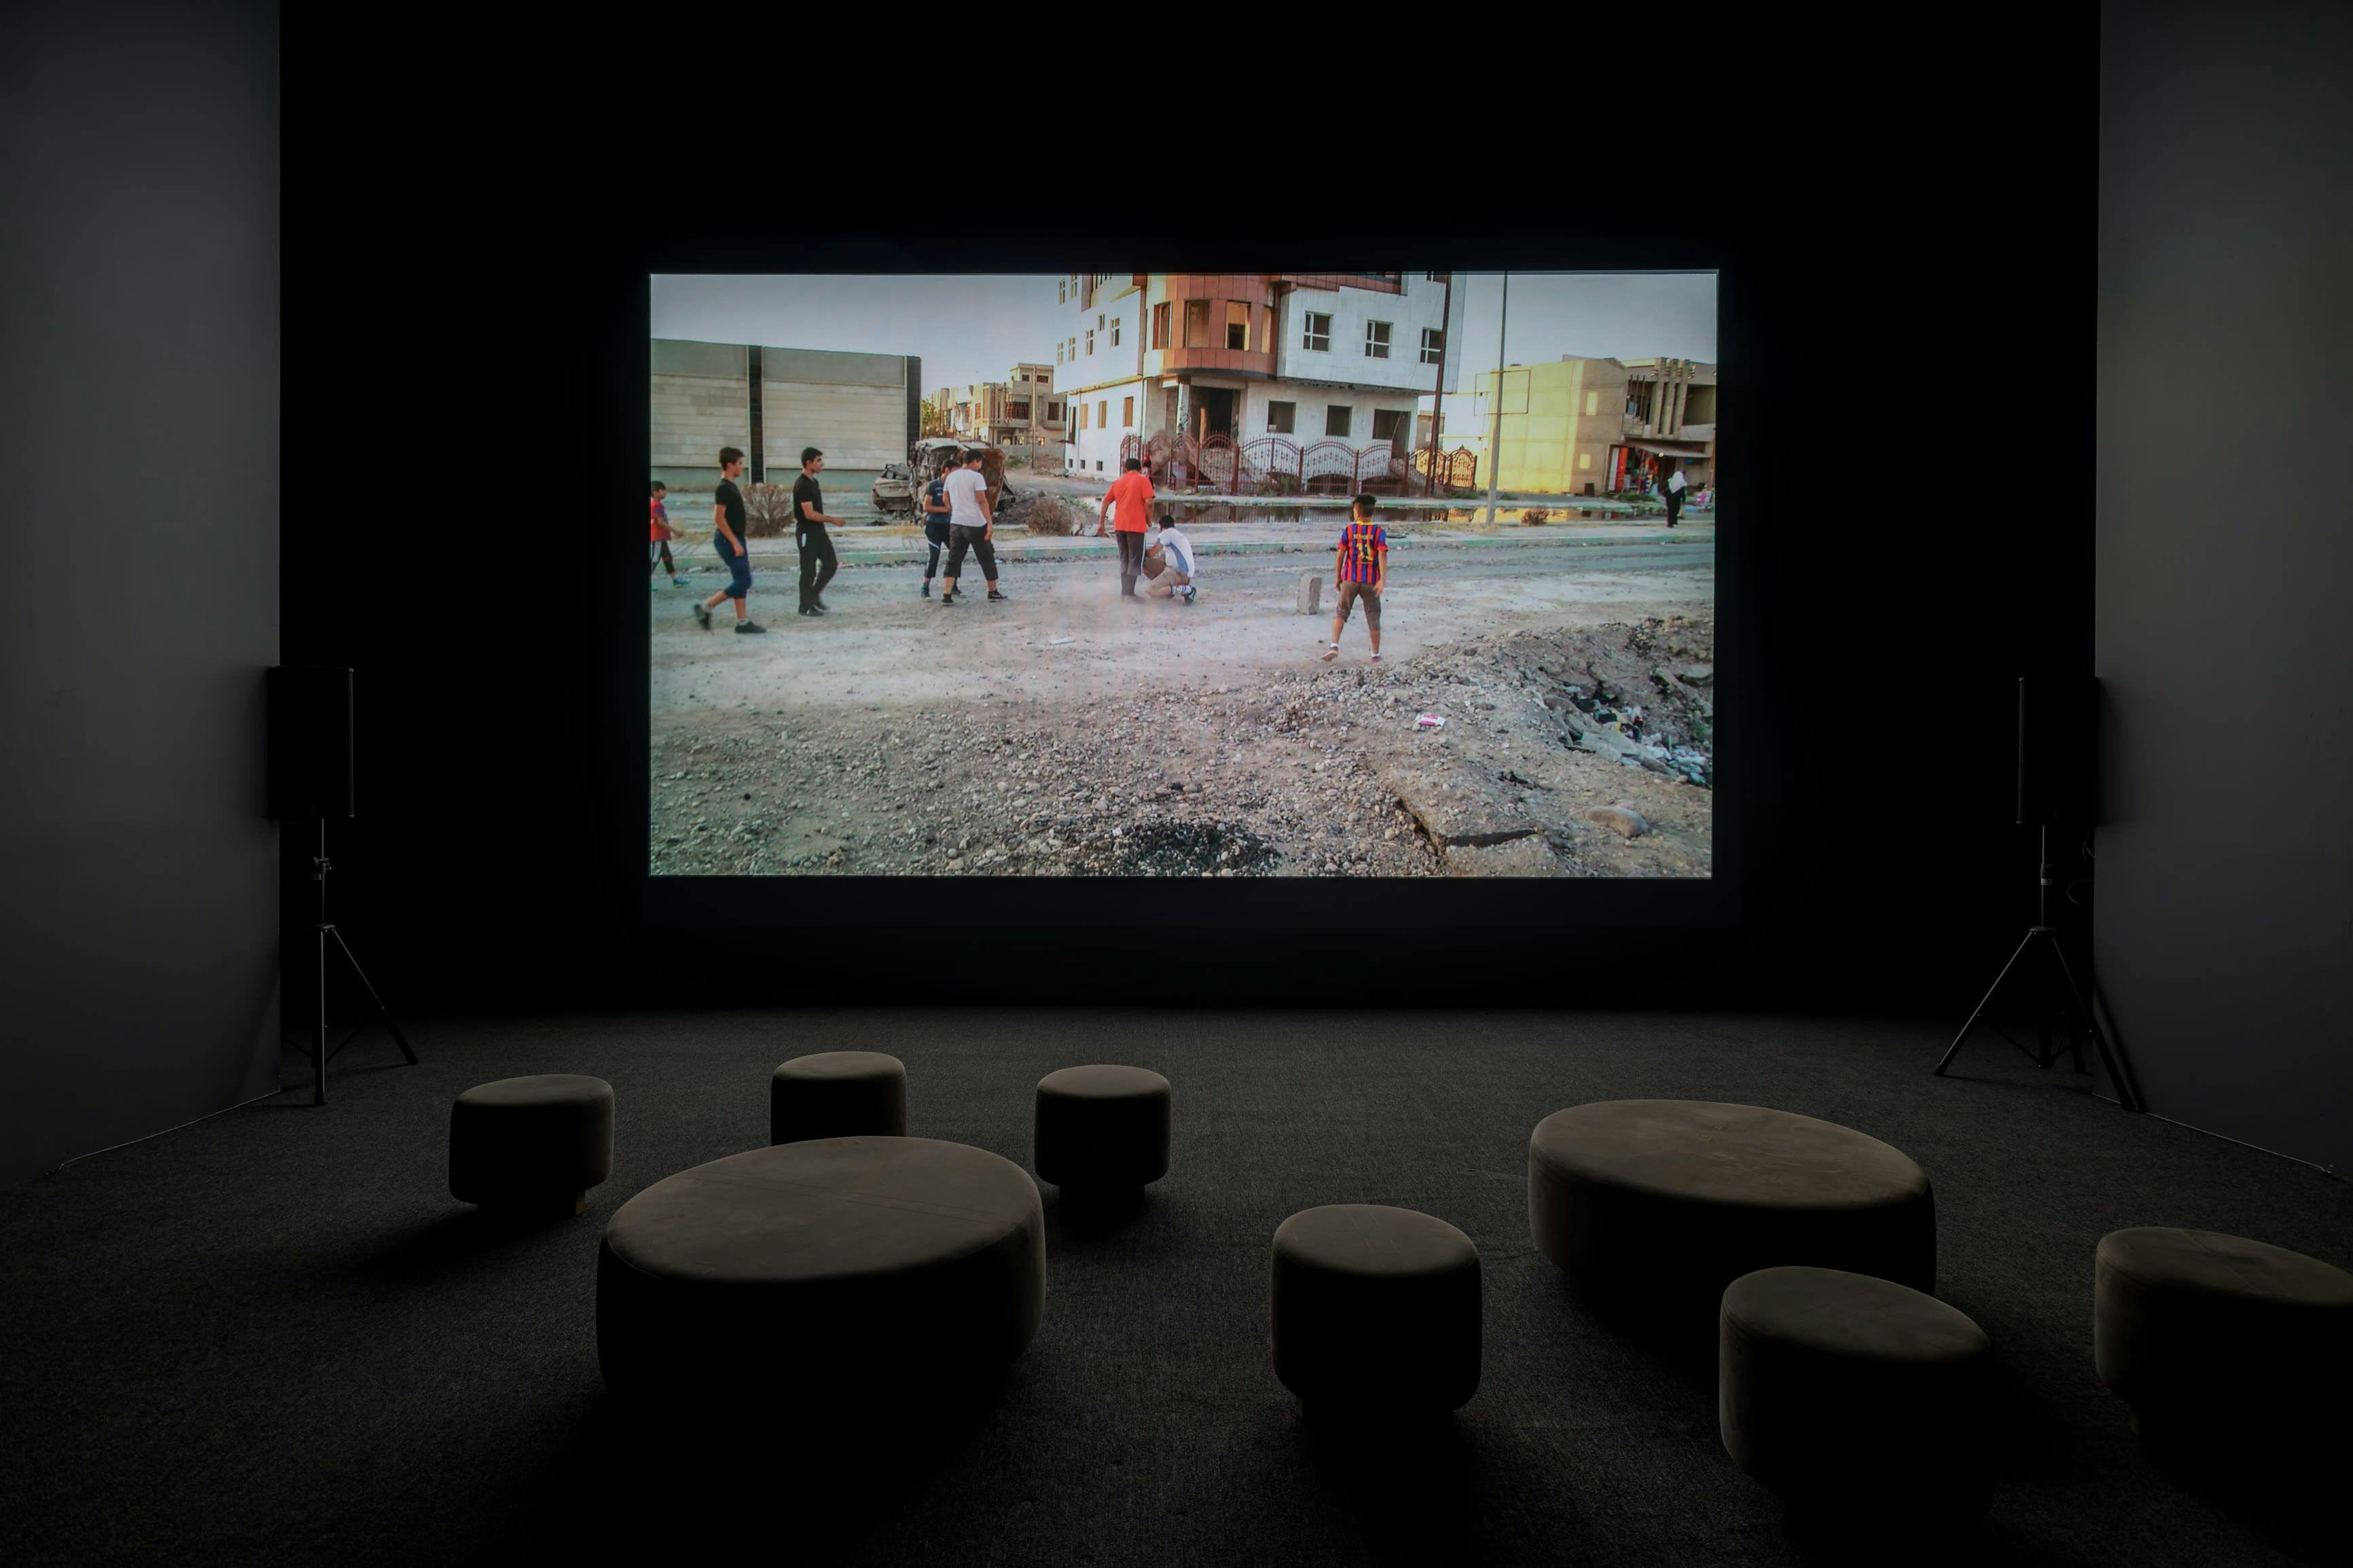 Installation view of the exhibition Francis Alÿs: Children’s Games, at the Museo Universitario Arte Contemporáneo in Mexico City, dated 2023.